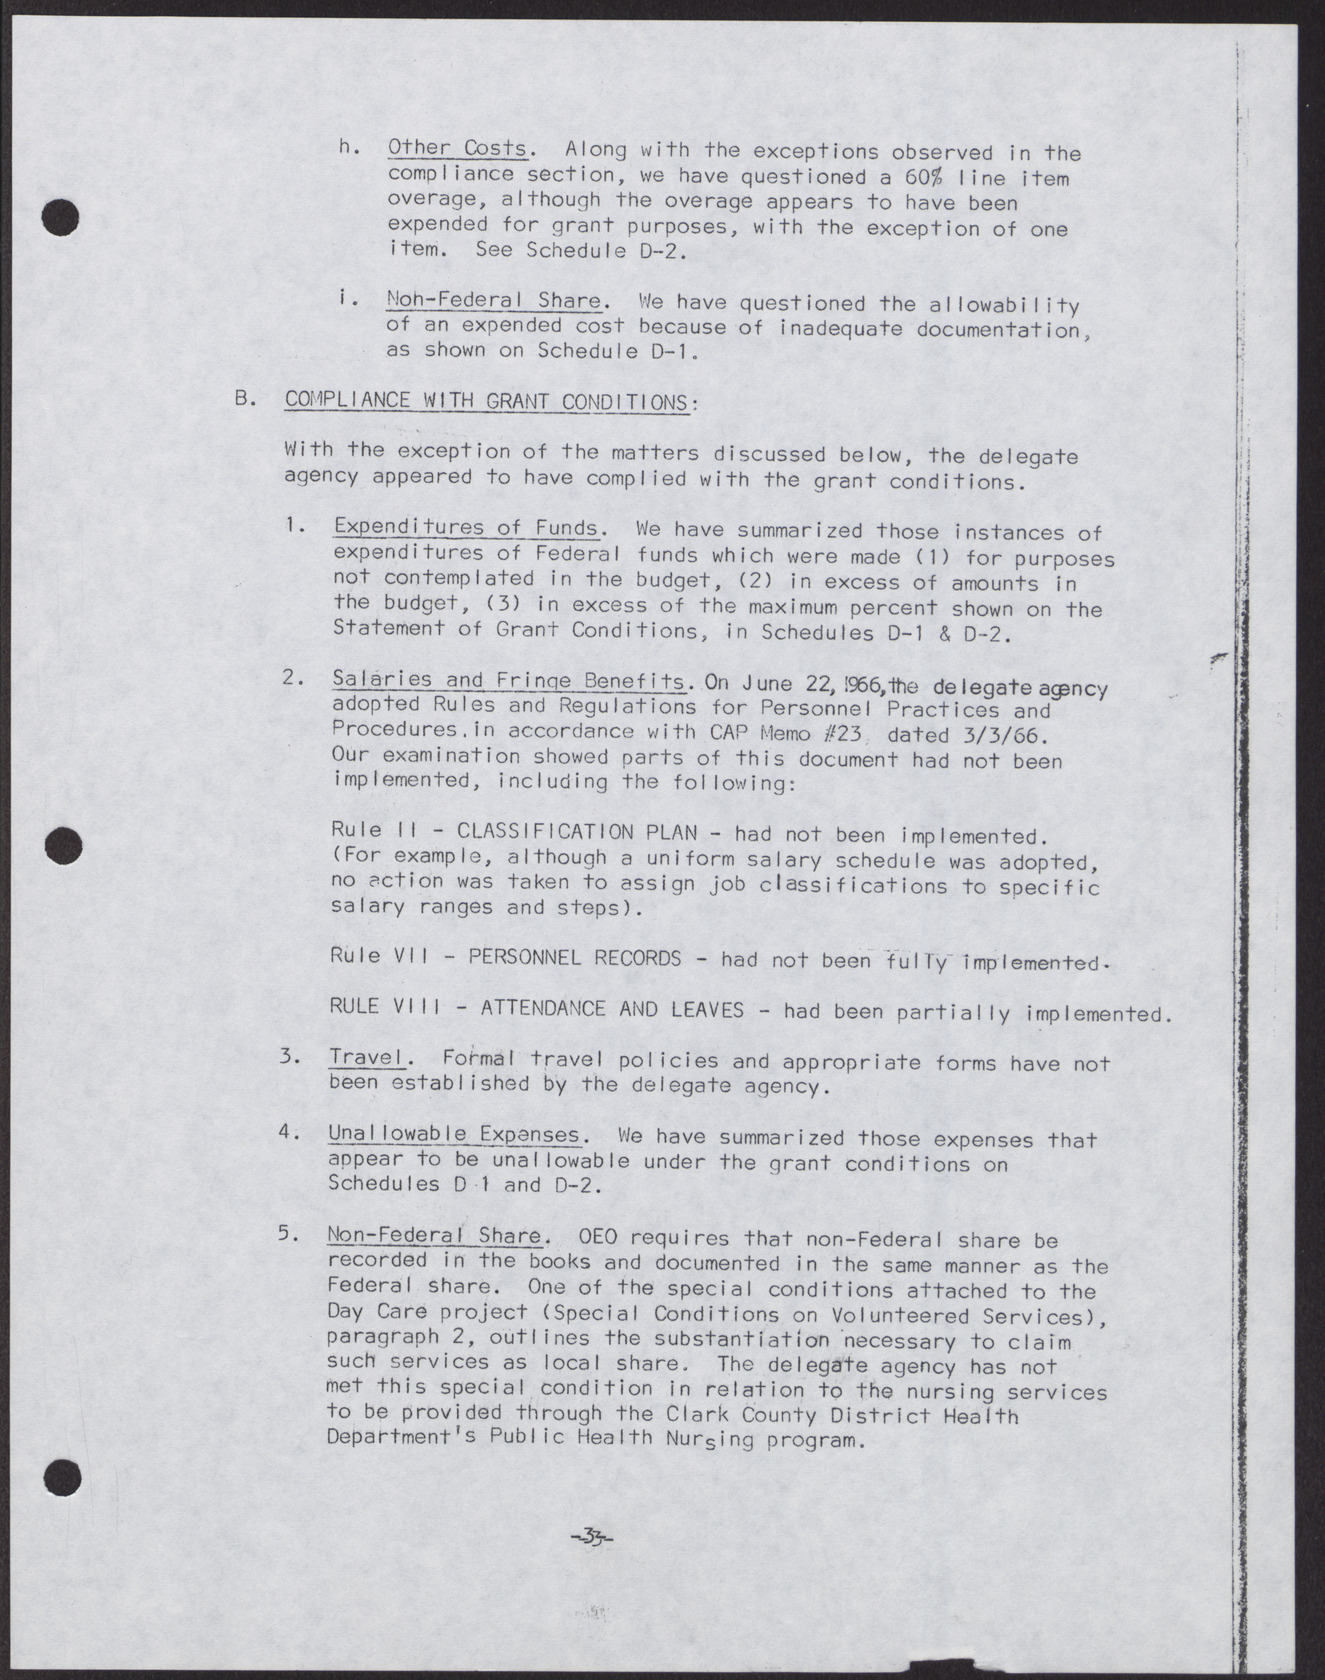 Operation Independence, Inc. Summary of Results of Financial and Compliance Examination; Current General Fund; Funds Received and Disbursed; Budgeted, Uncured, and Questioned Costs (10 pages), December 31, 1966, page 3